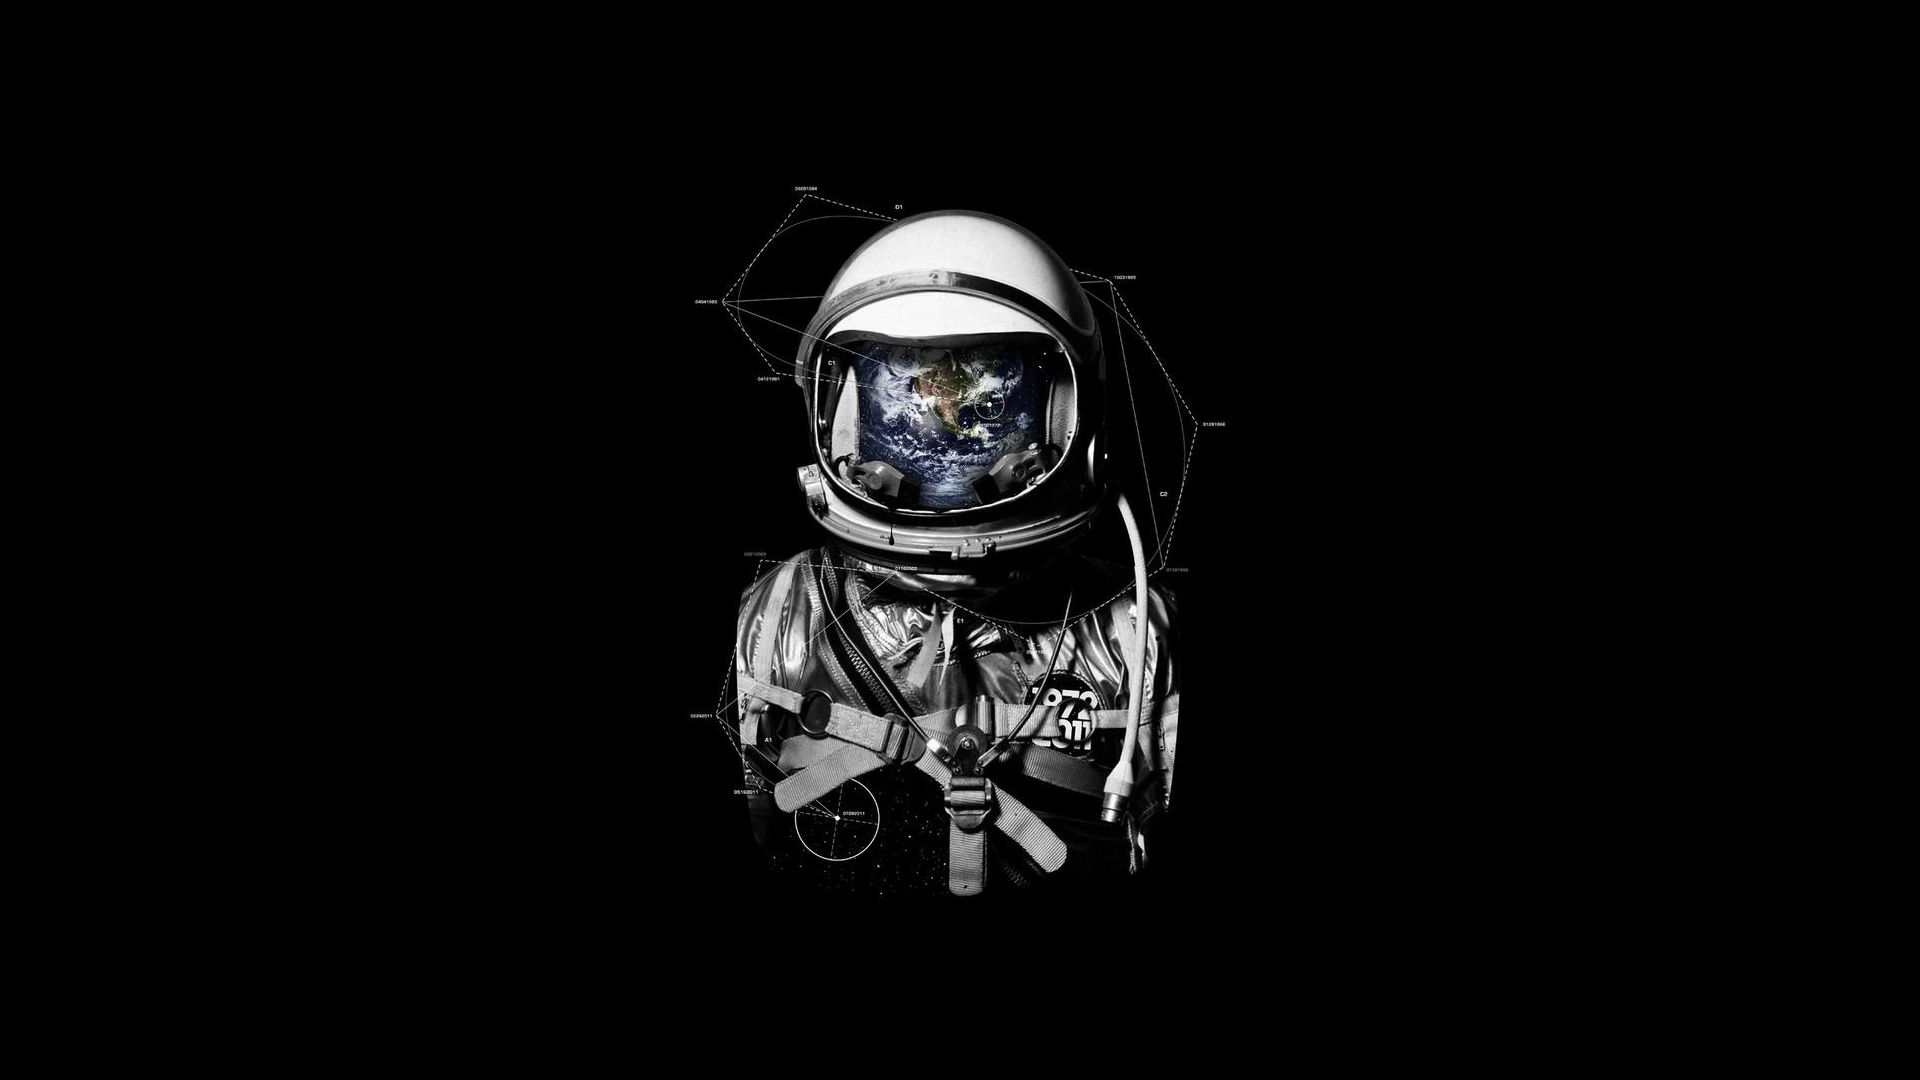  Astronaut HQ Background Images